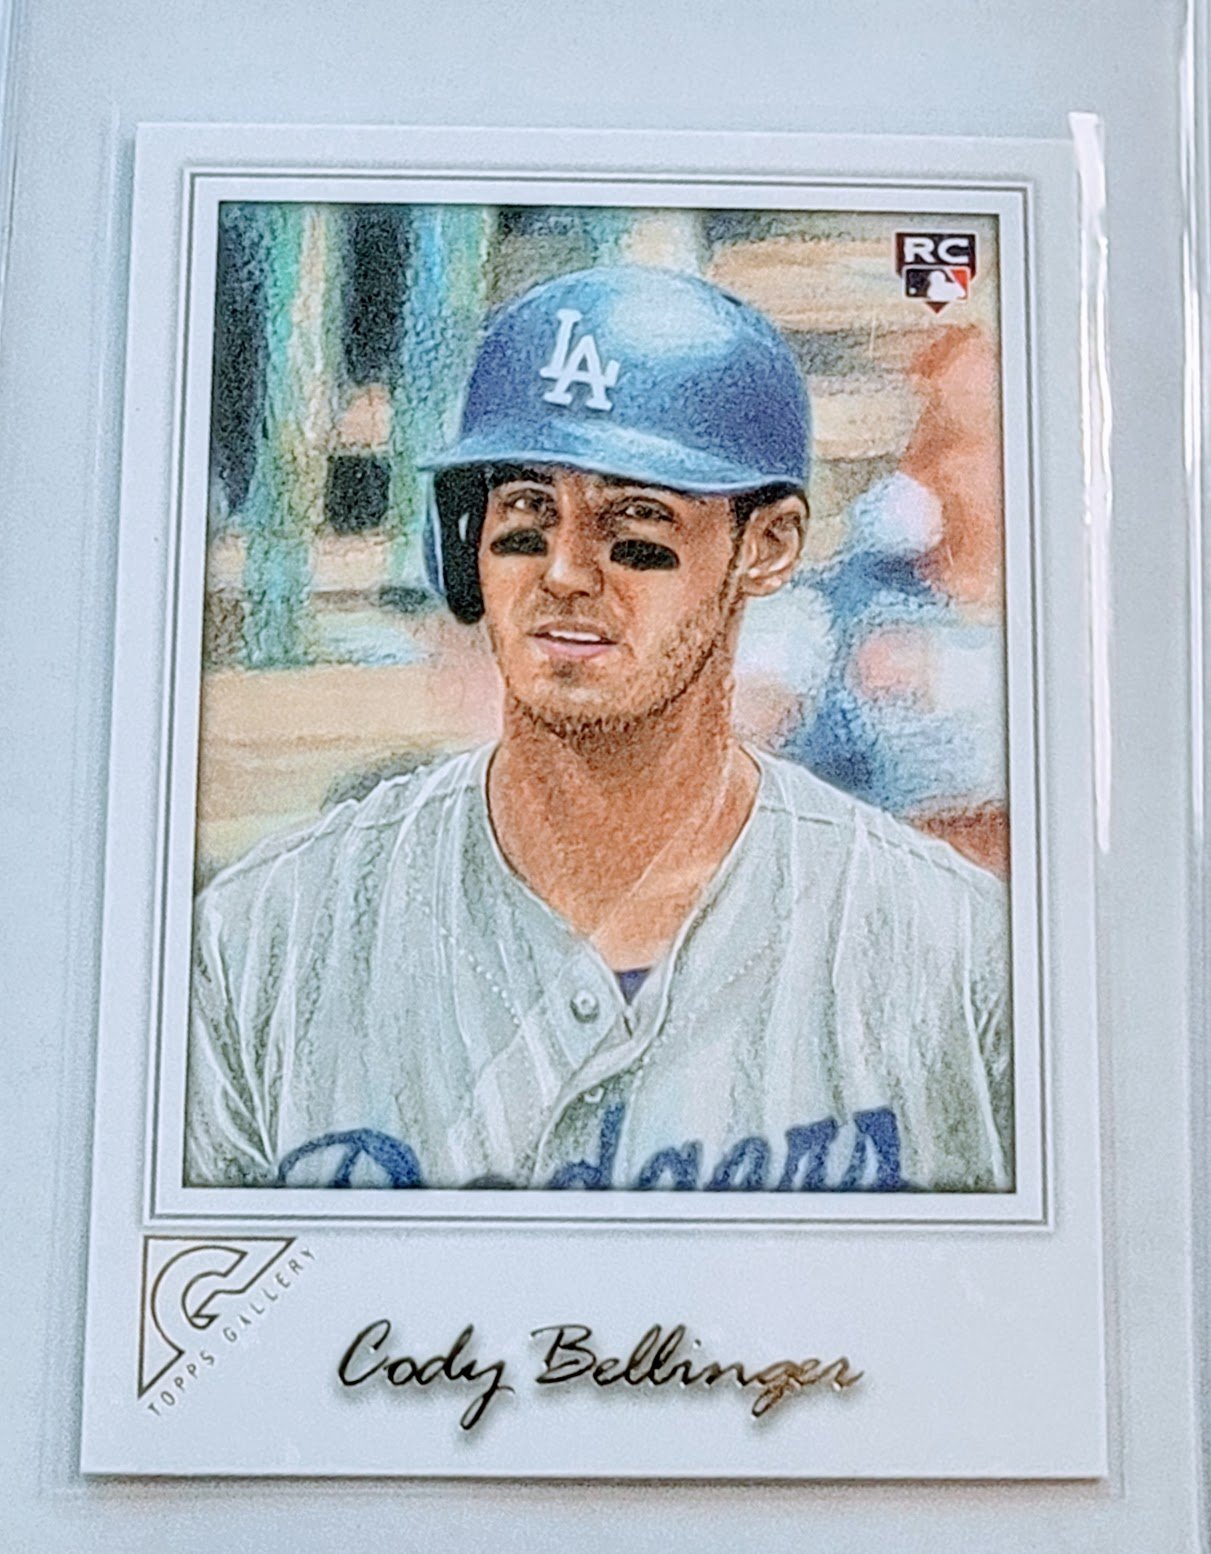 2017 Topps Gallery Cody Bellinger Portrait Rookie Baseball Card TPTV simple Xclusive Collectibles   